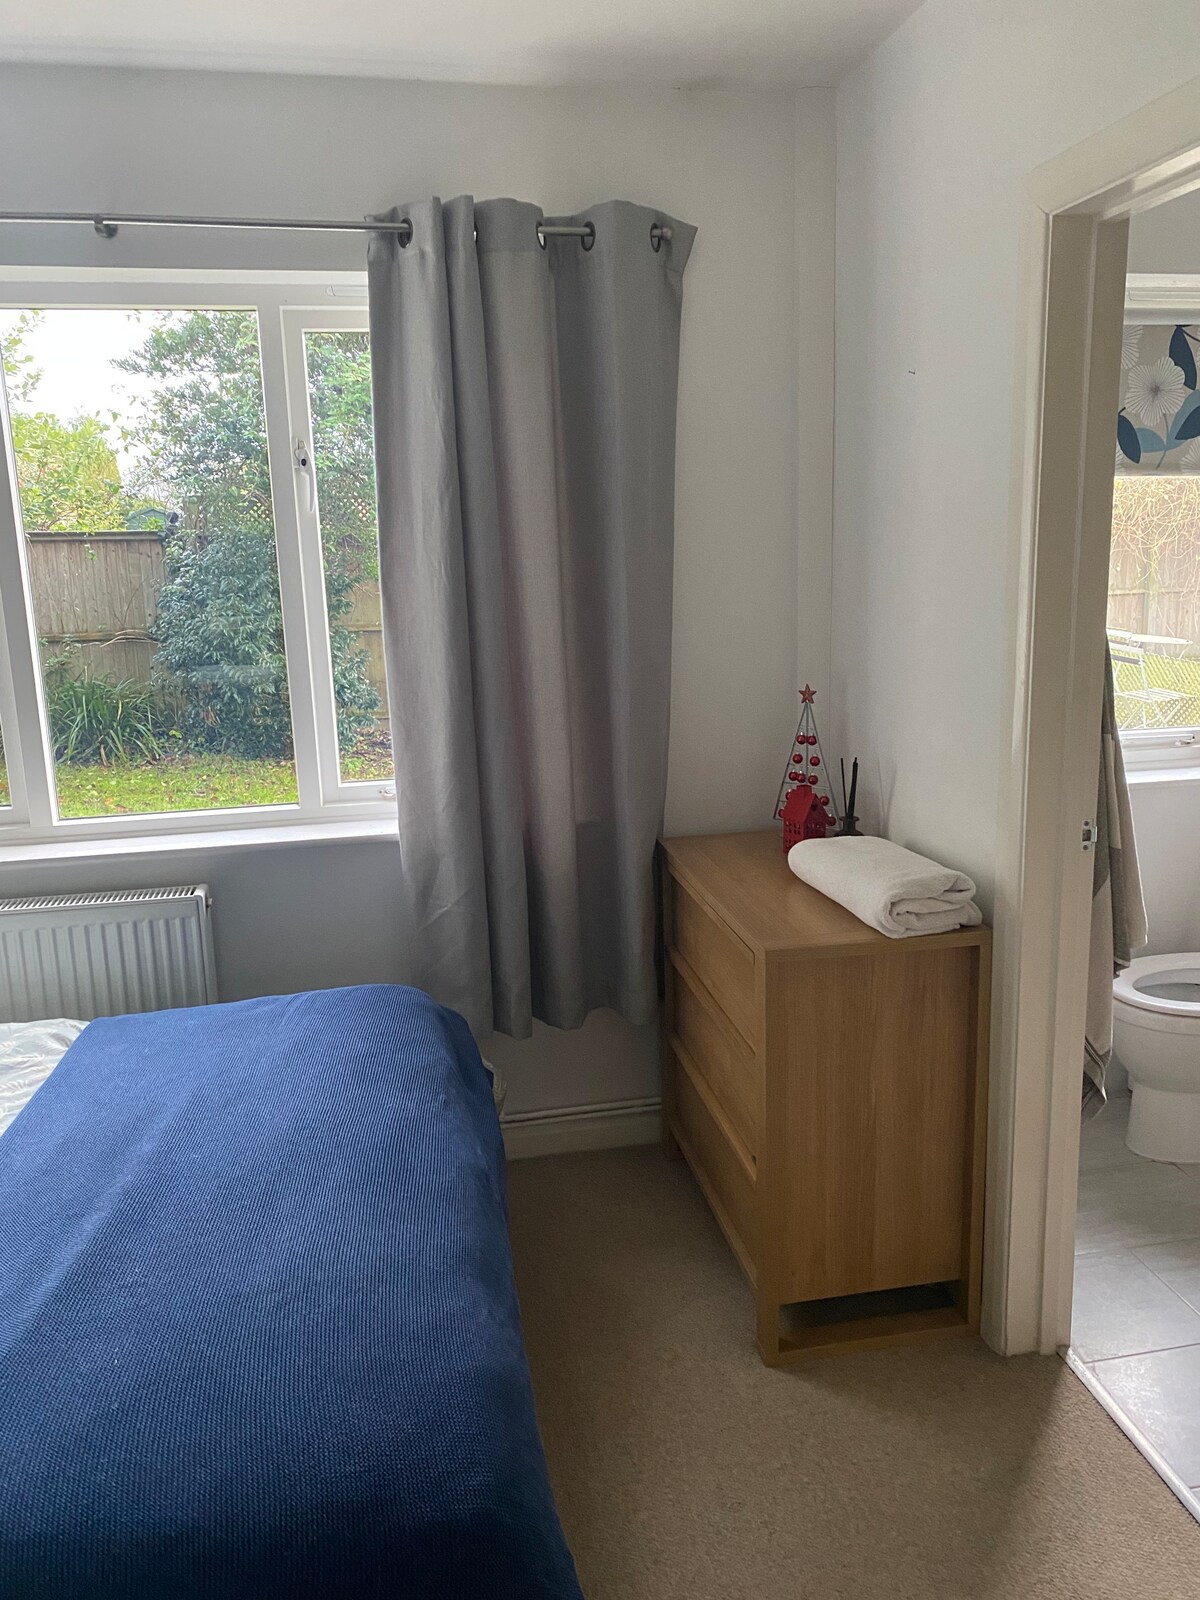 Ensuite double room in detached house.